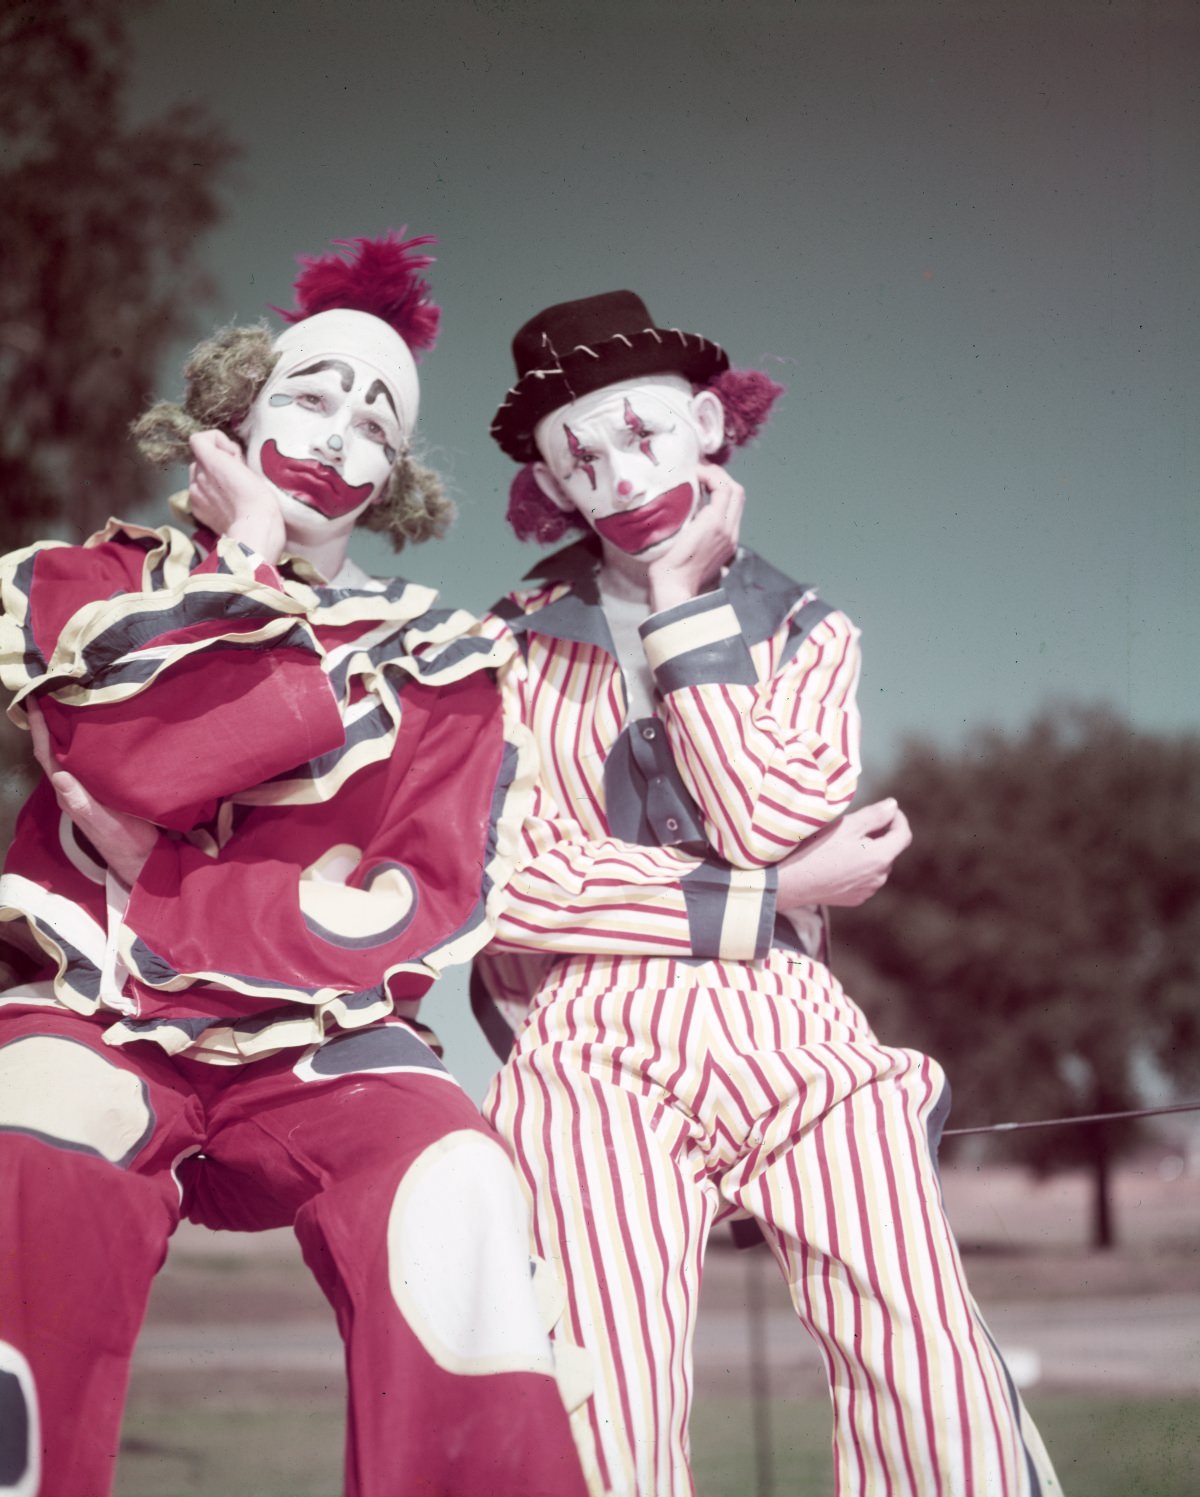 lorida State University Flying High Circus performers dressed as clownsRed, 1950